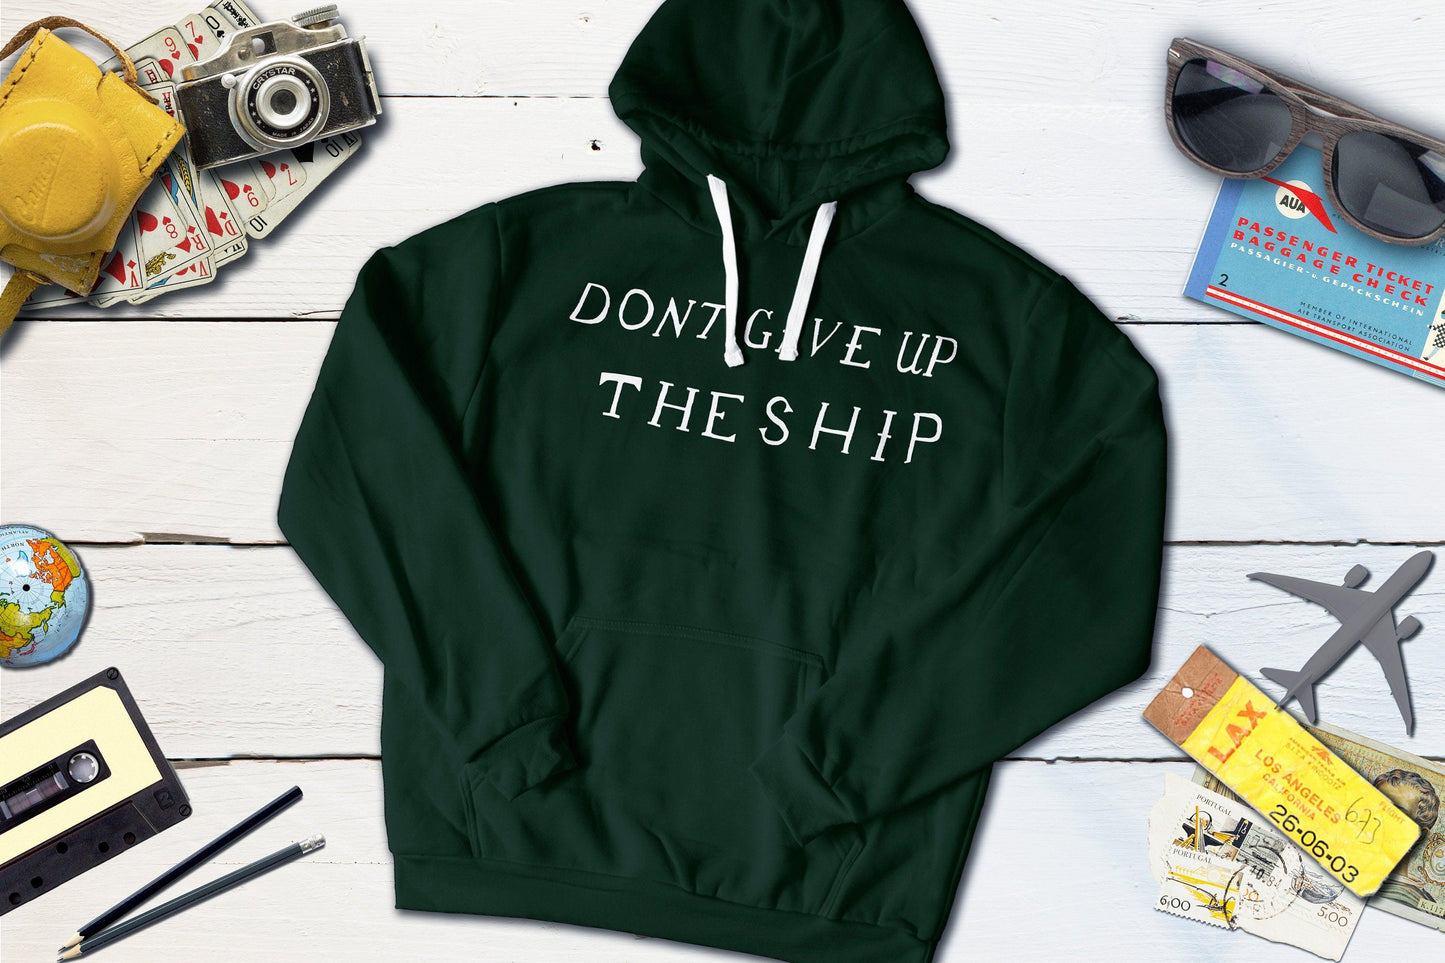 Don't Give Up The Ship Commodore Perry Battle Flag War of 1812-Hooded Sweatshirt-Yesteeyear